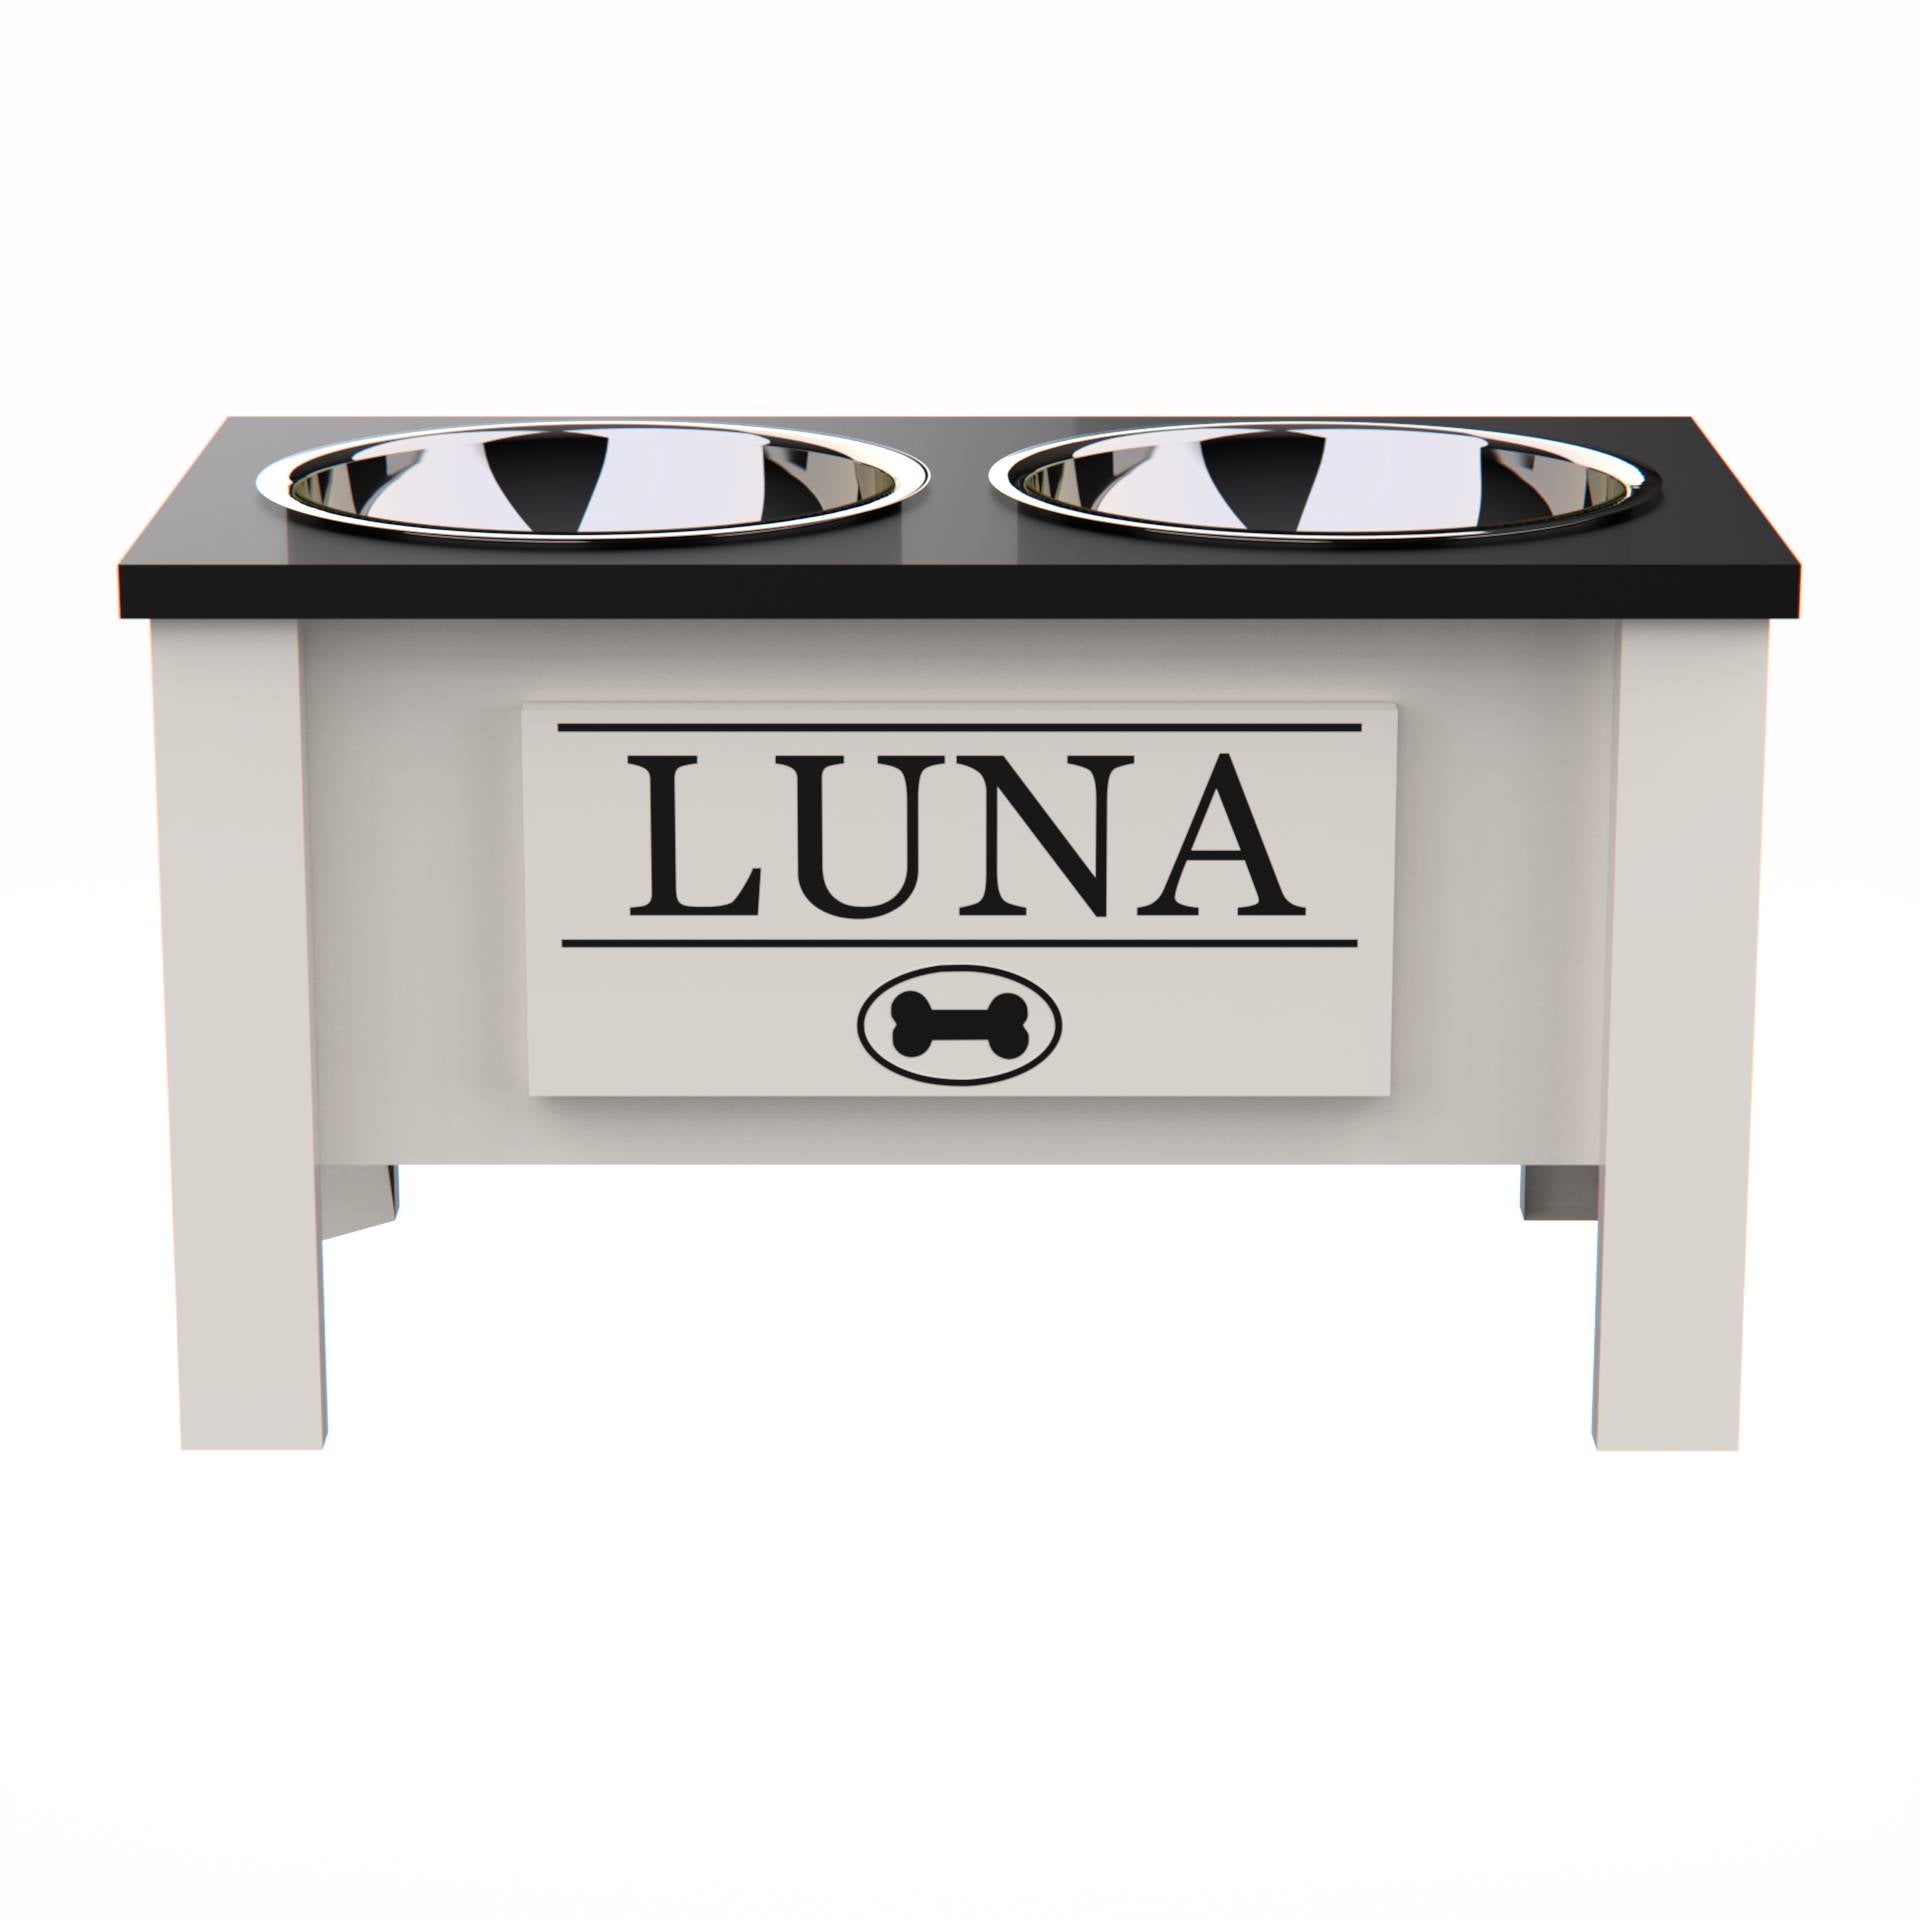 Personalized Elevated Dog Bowl Stand with Internal Storage - Black S